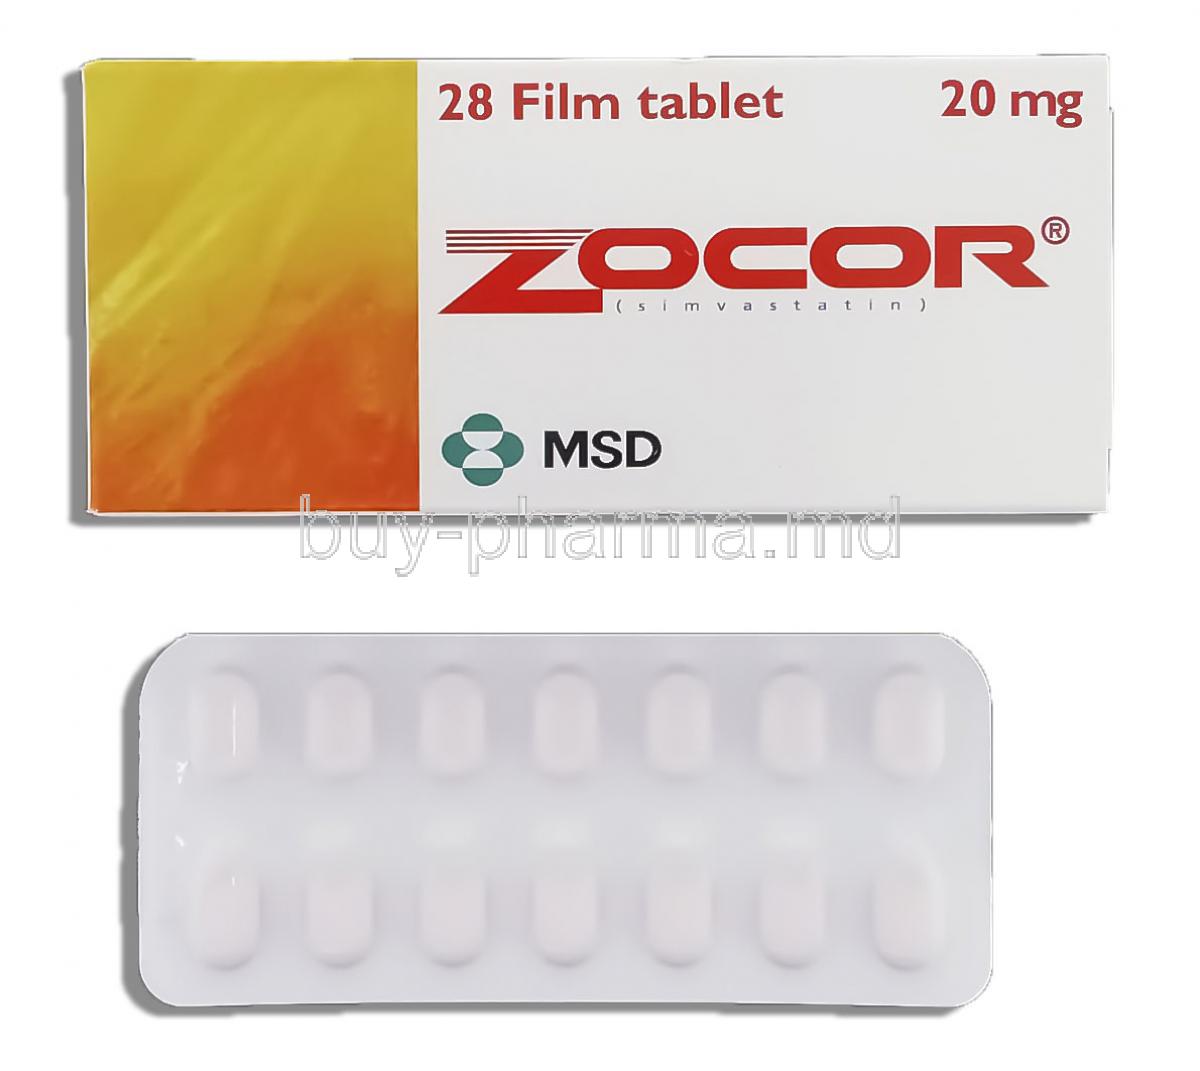 what is zocor 20 mg used for